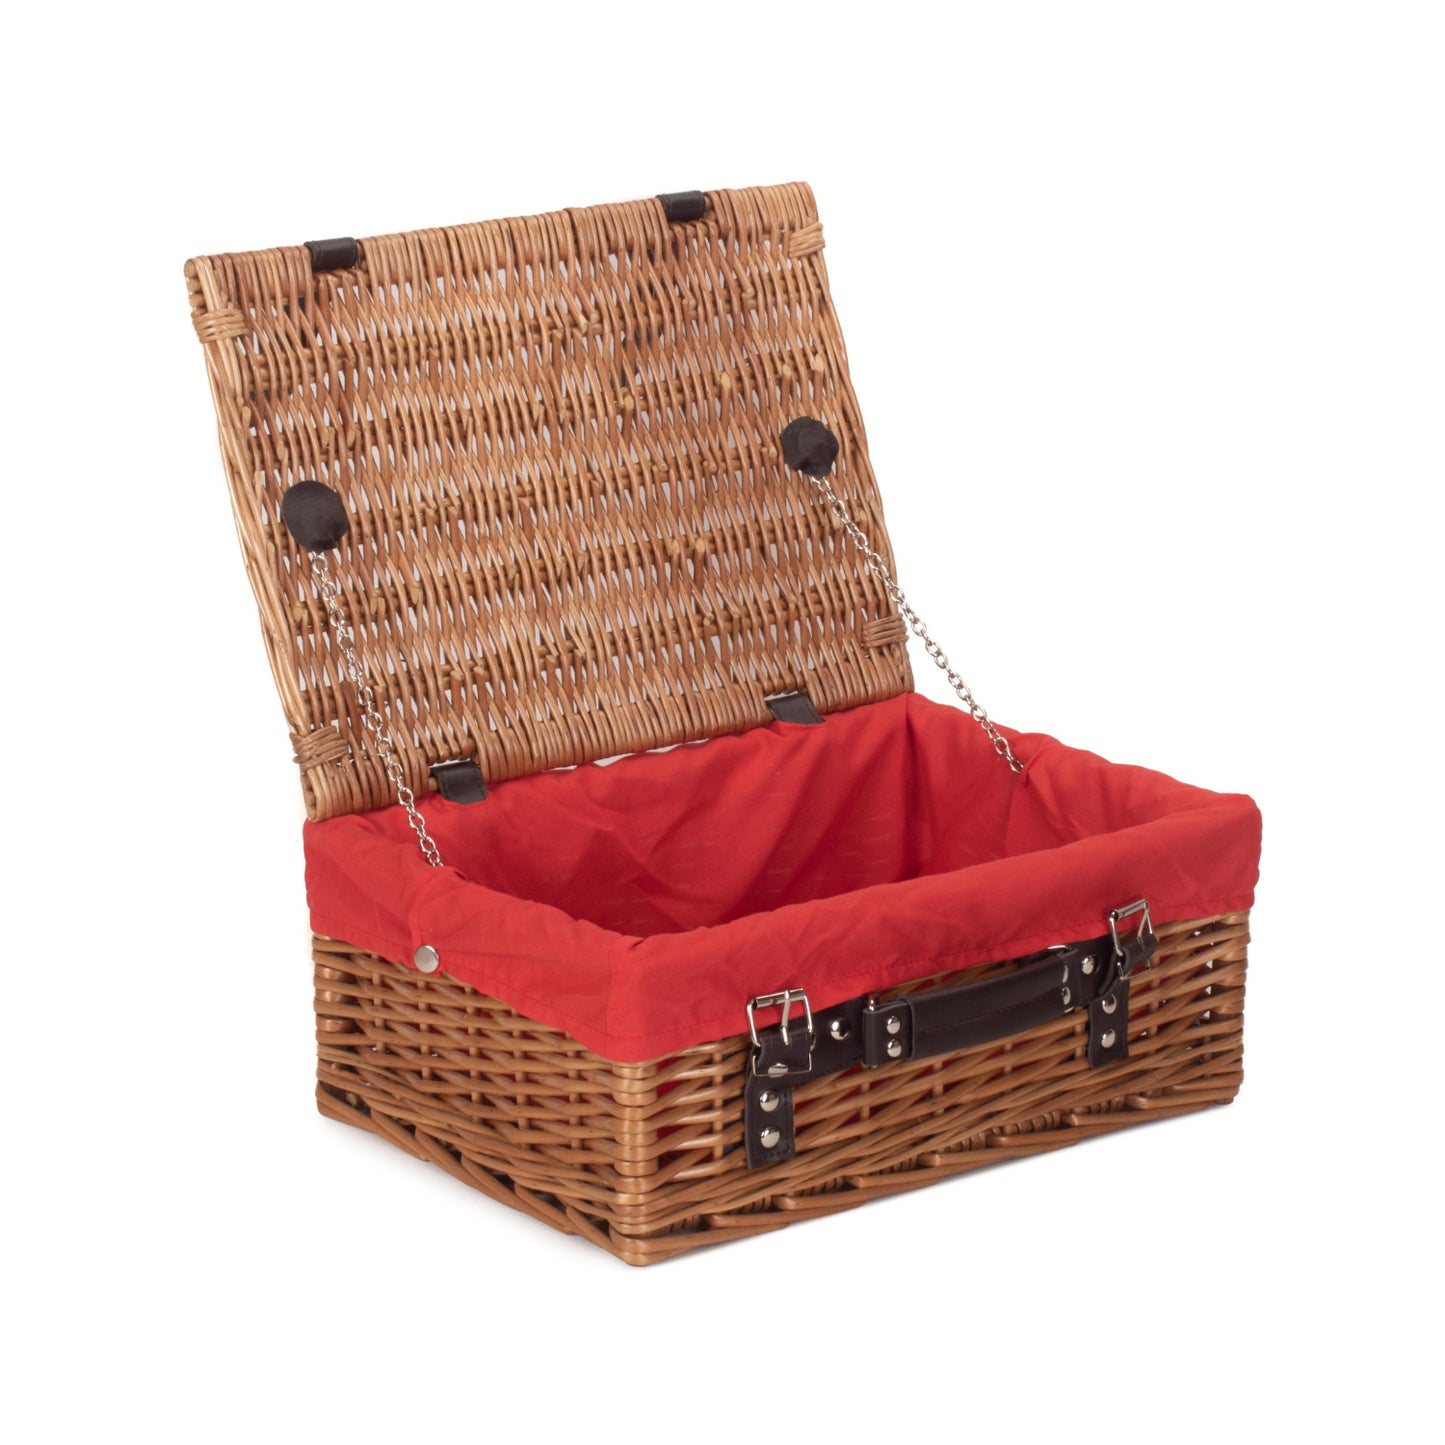 14 Inch Double Steamed Hamper With Red Lining